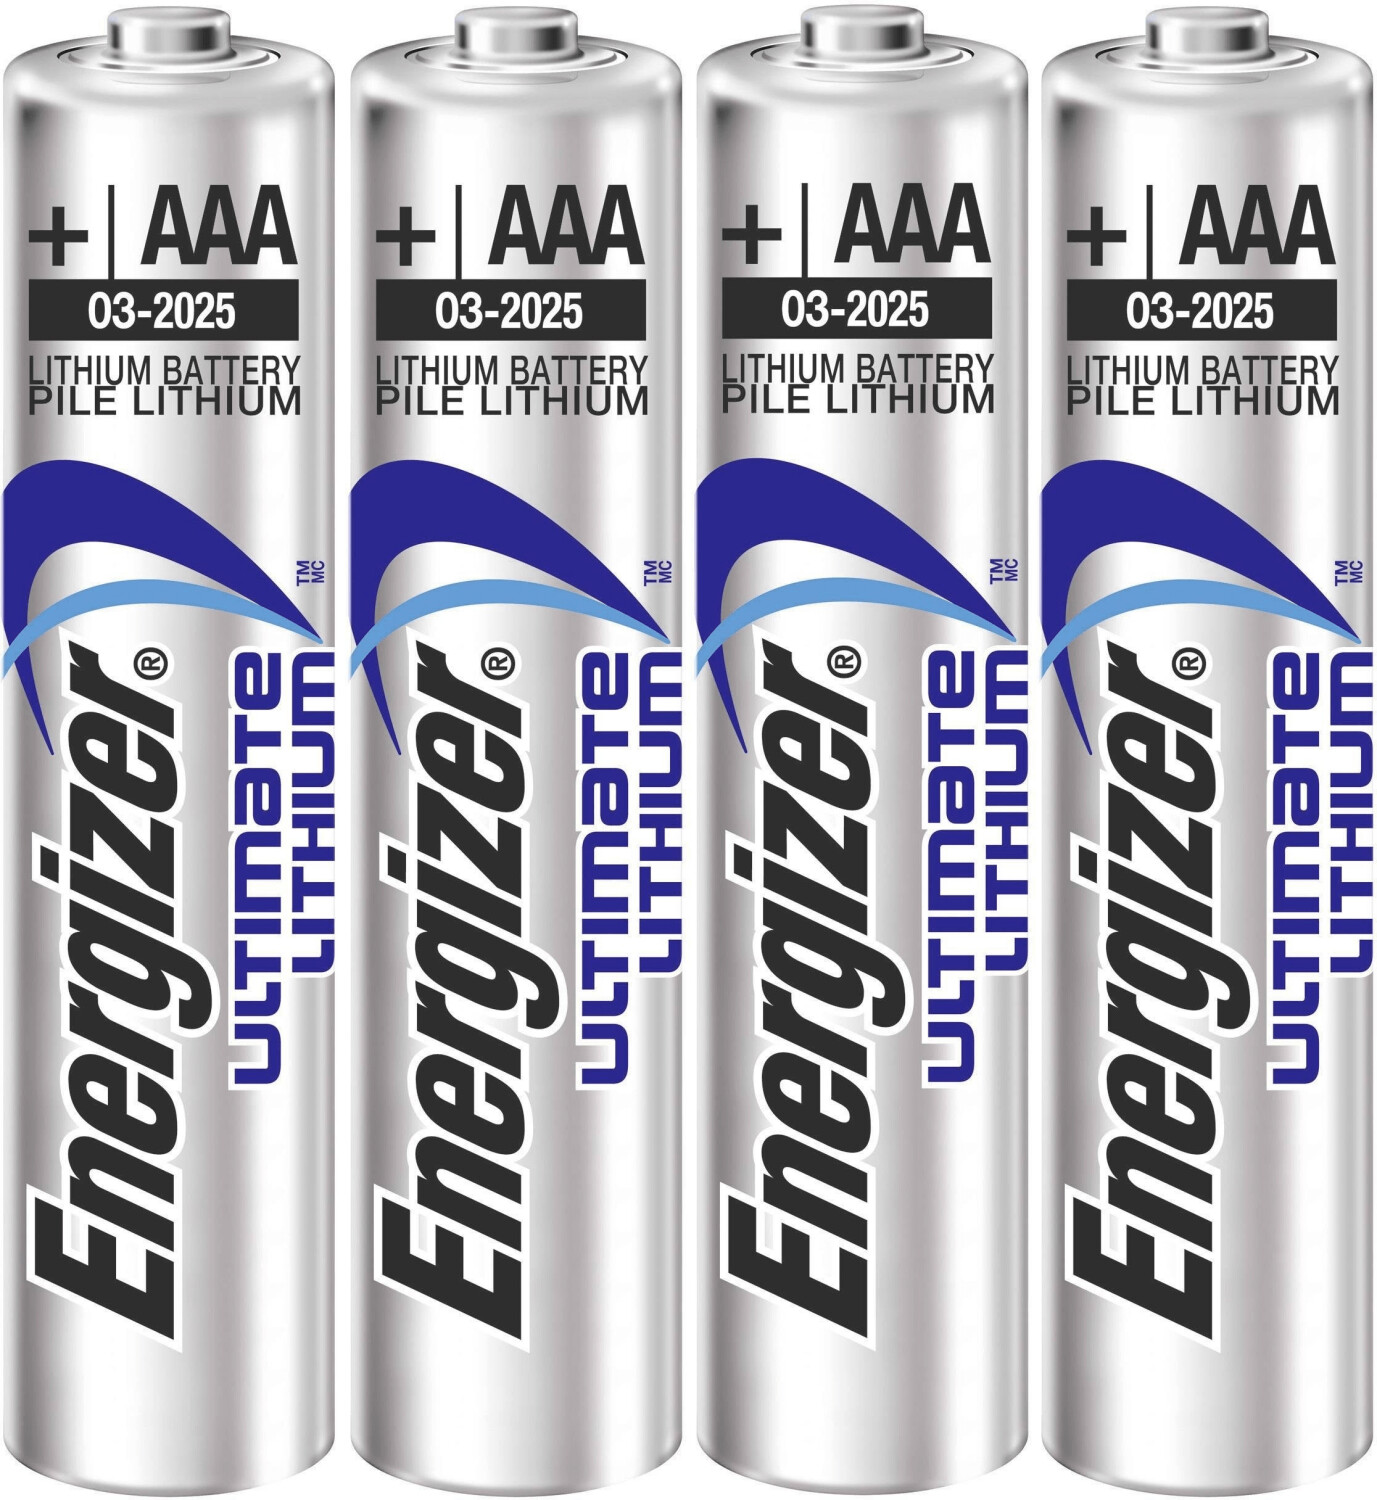 ENERGIZER Pile Ultimate Lithium AAA LR03, pack de 4 piles ≡ CALIPAGE